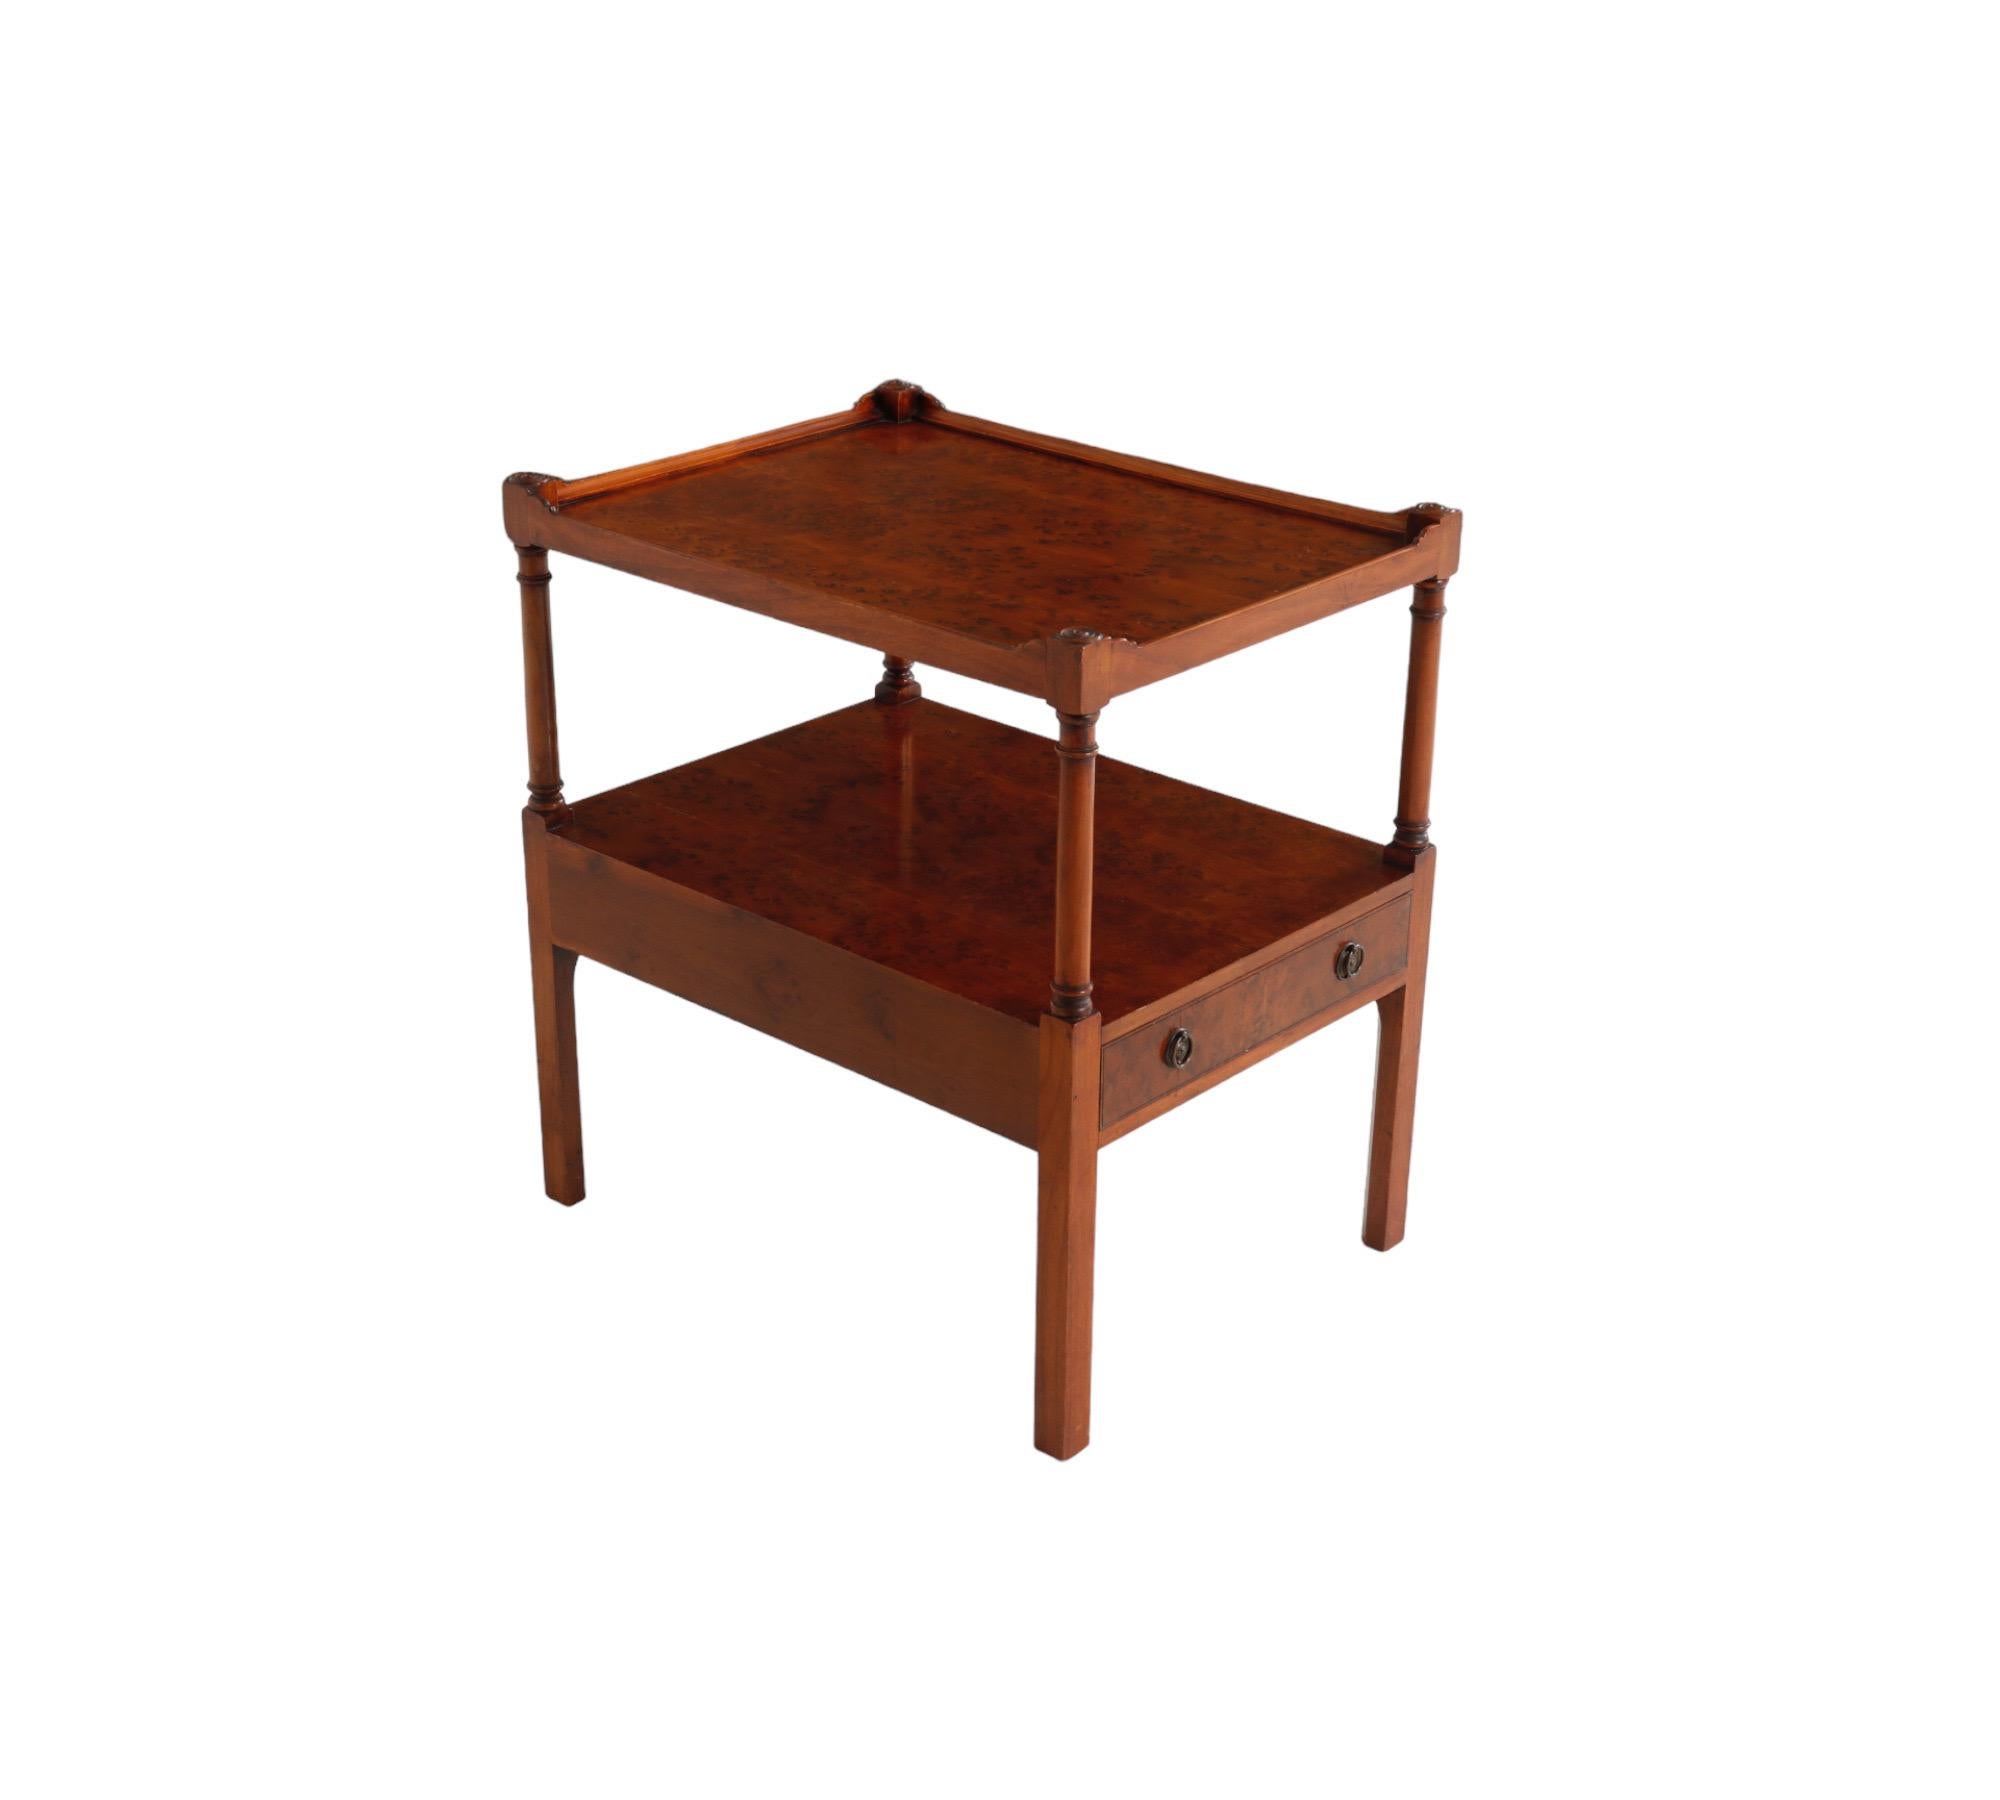 An English style two tier side table, custom made by Smith & Watson of New York. Top corners are finished with beveled circles. Below is a single dovetailed drawer that opens with two round metal handles. Decorated throughout with birdseye maple